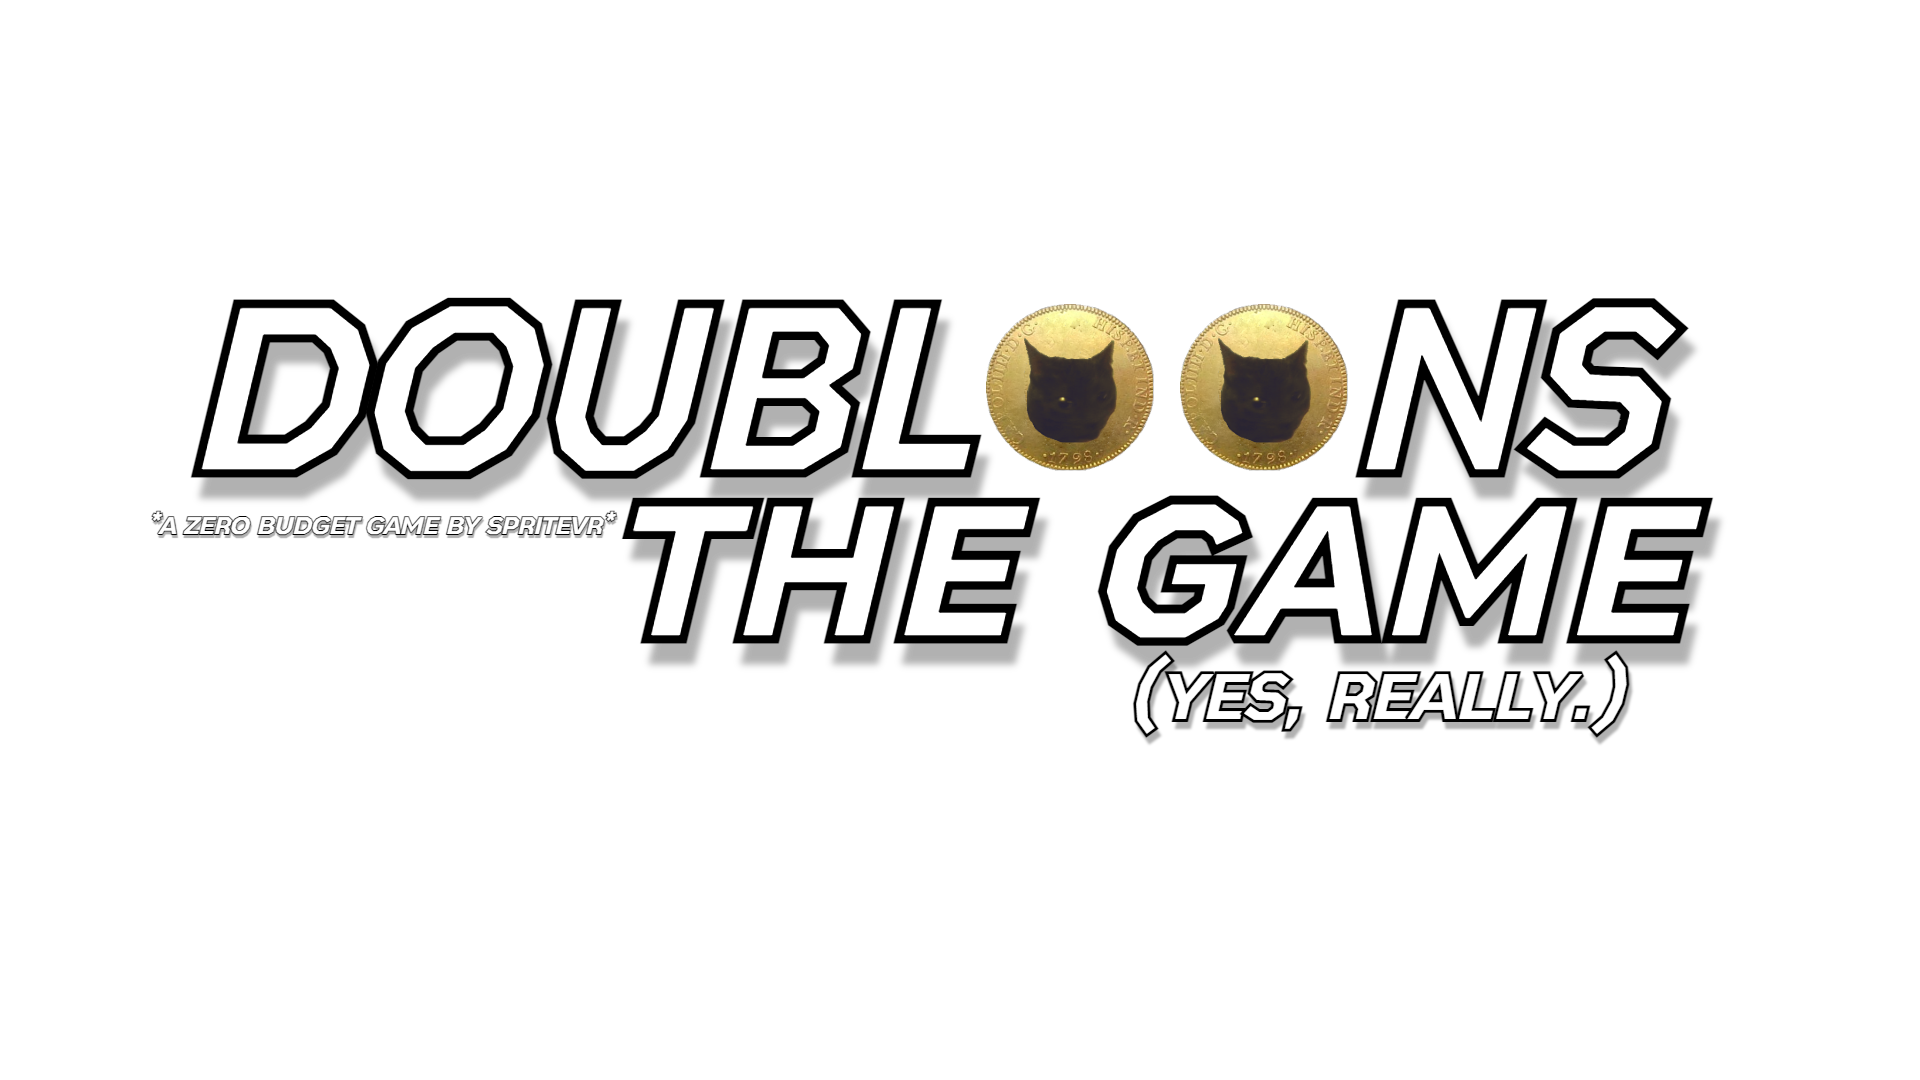 DOUBLOONS THE GAME